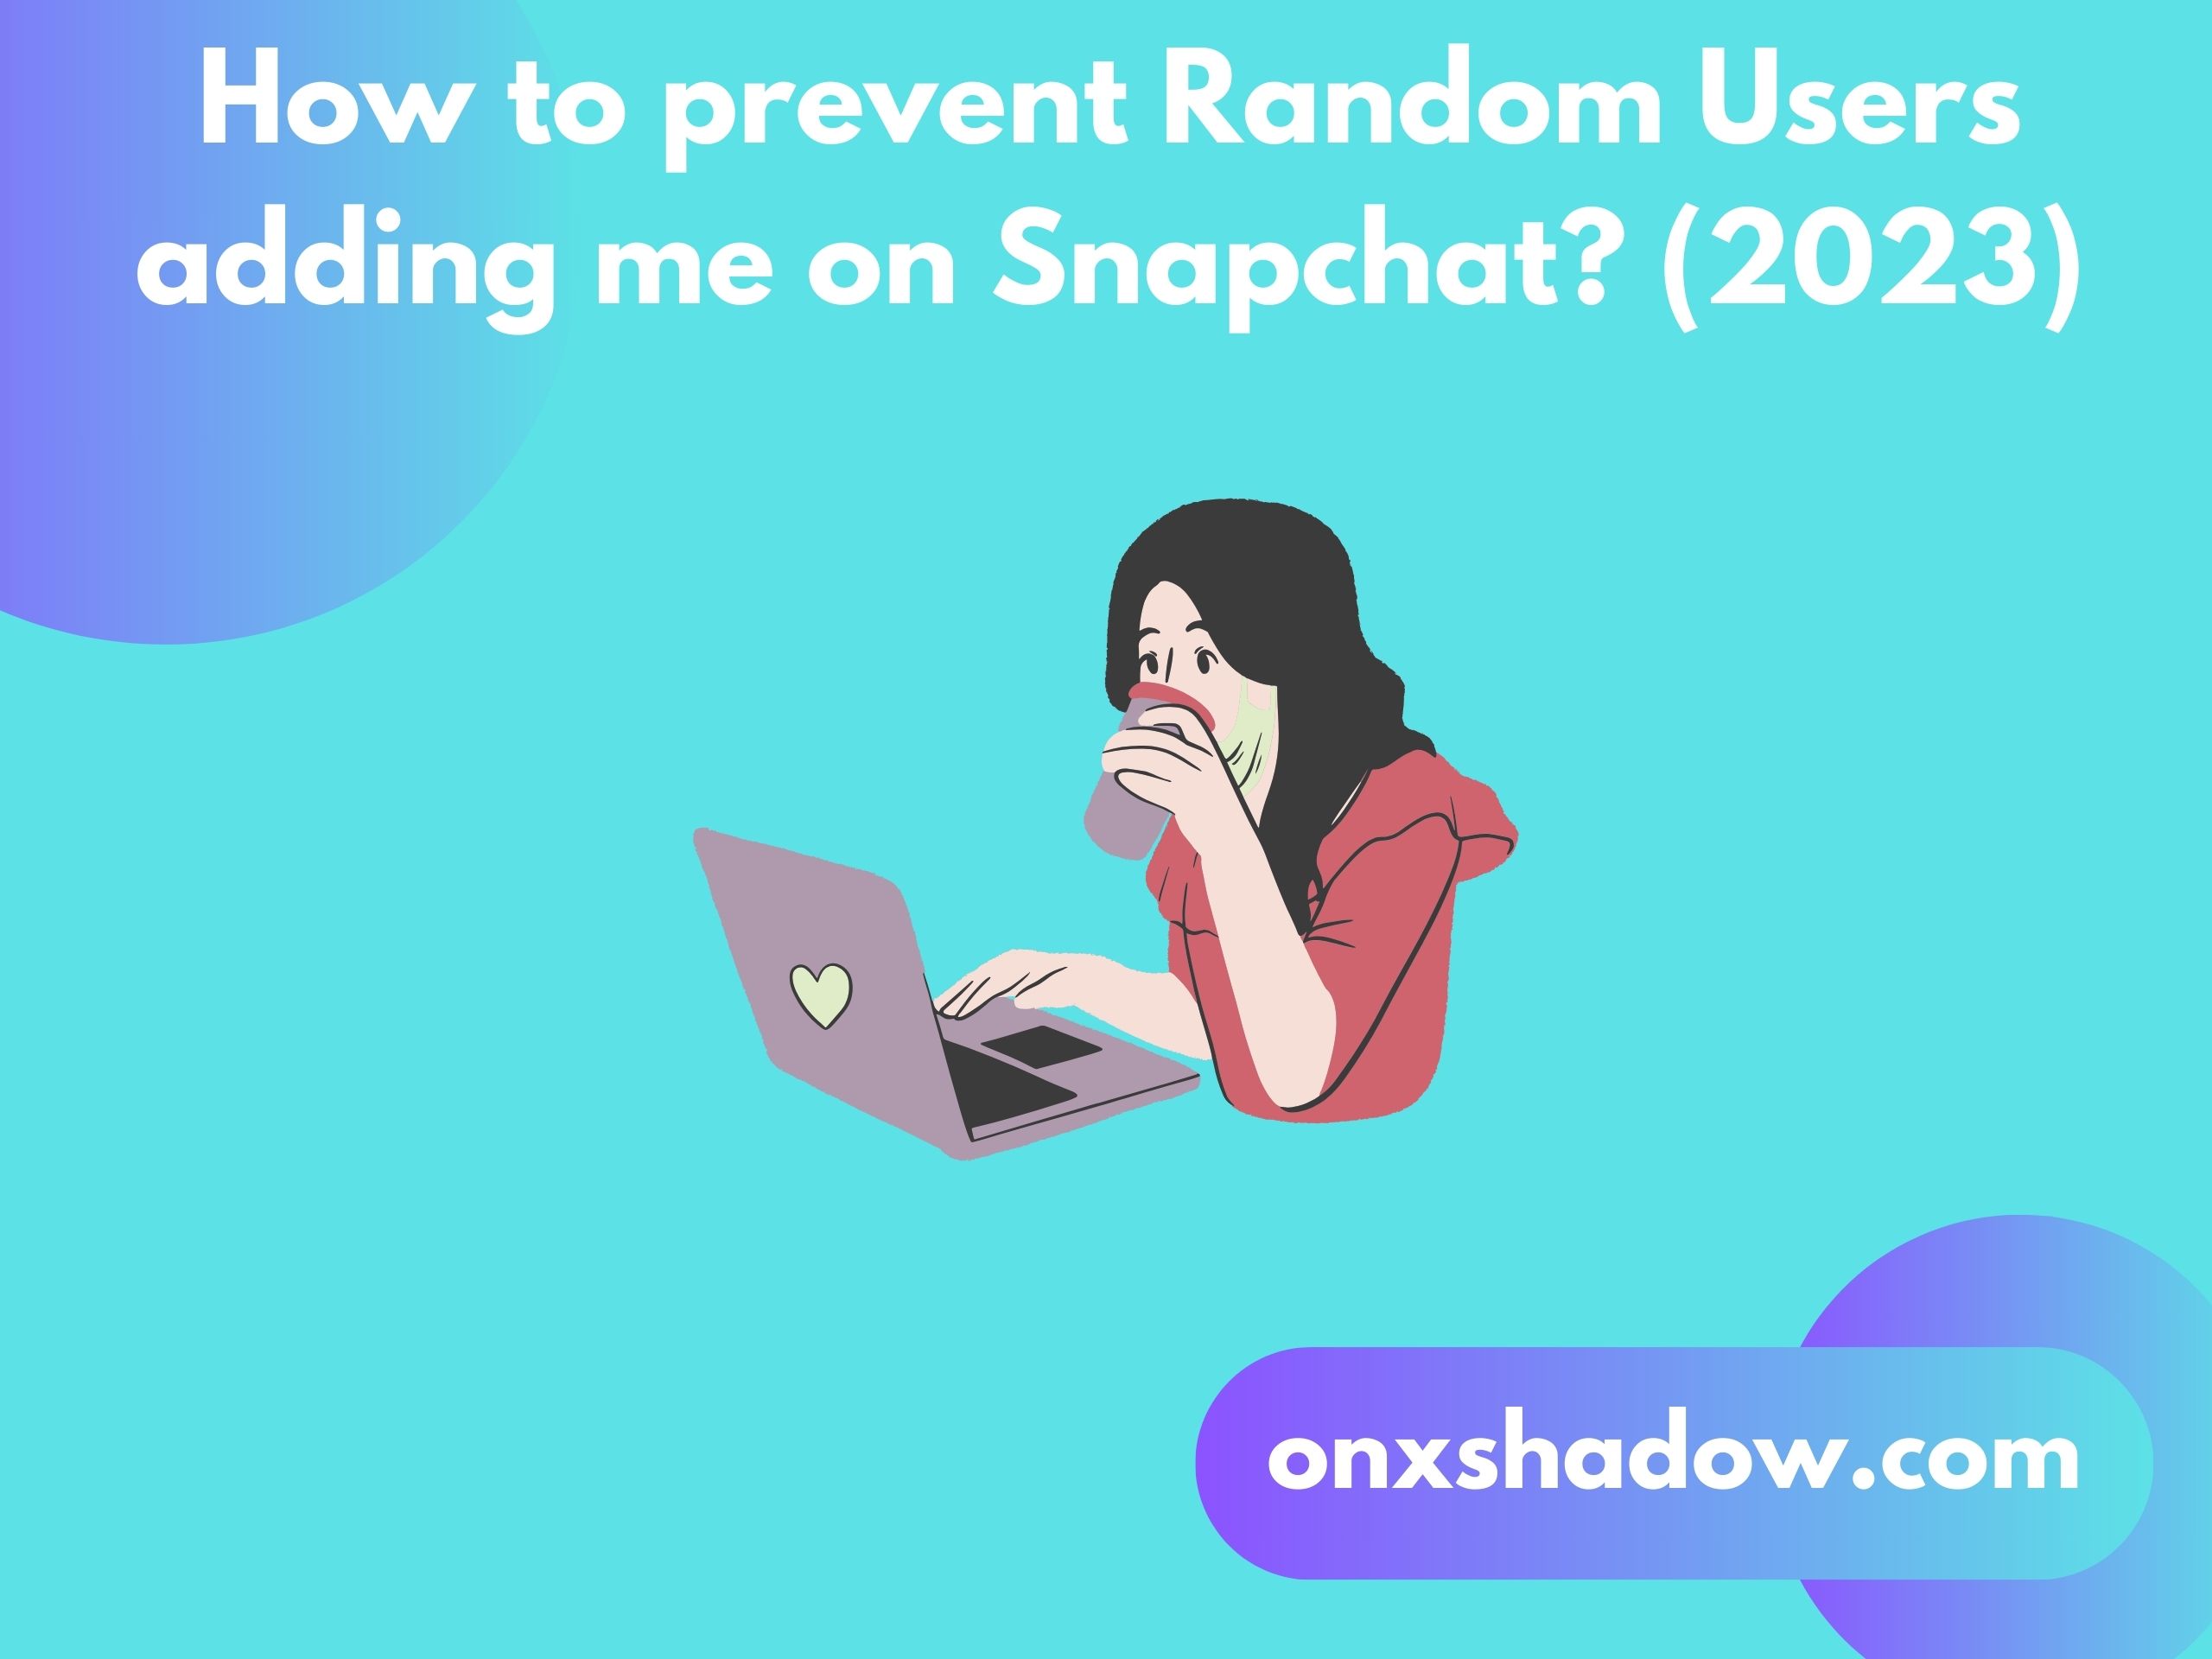 How to prevent Random Users adding me on Snapchat? (2023)